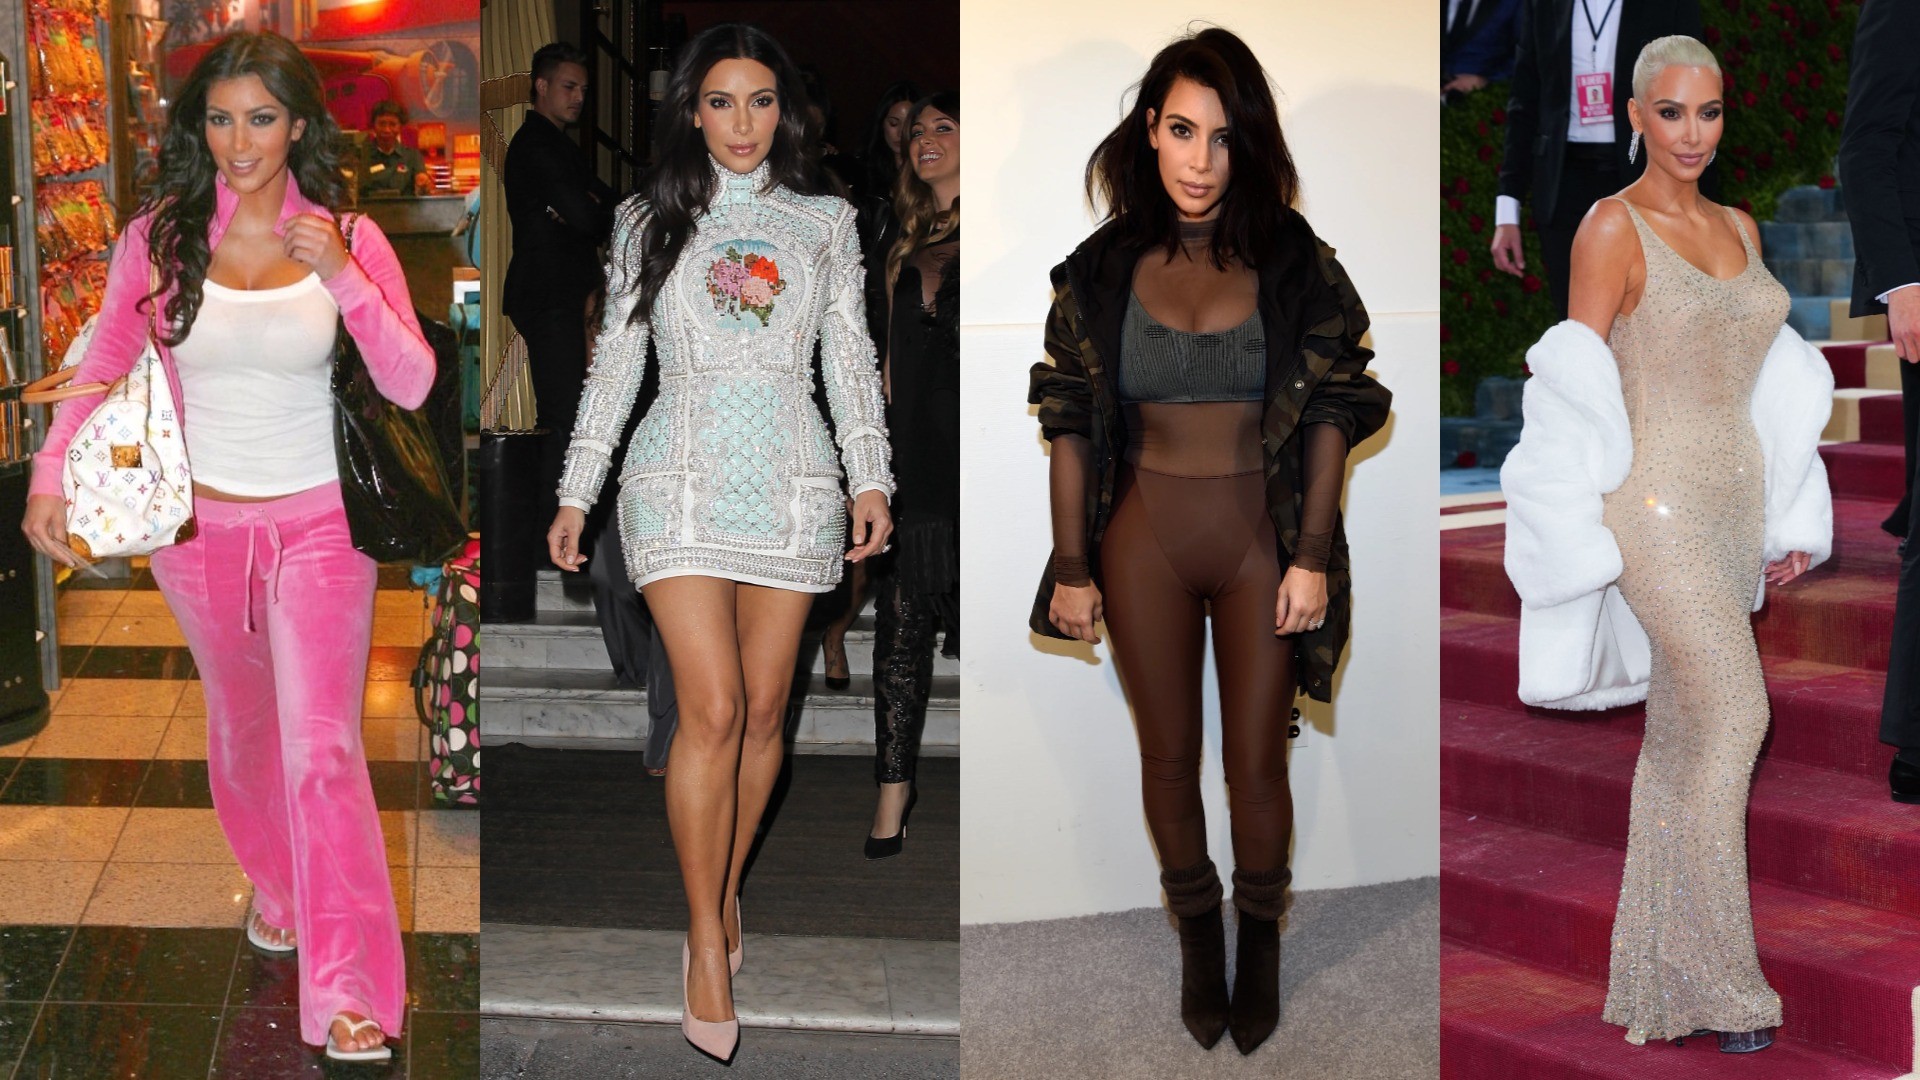 2010s fashion: Kim Kardashian's style of Juicy Couture tracksuits